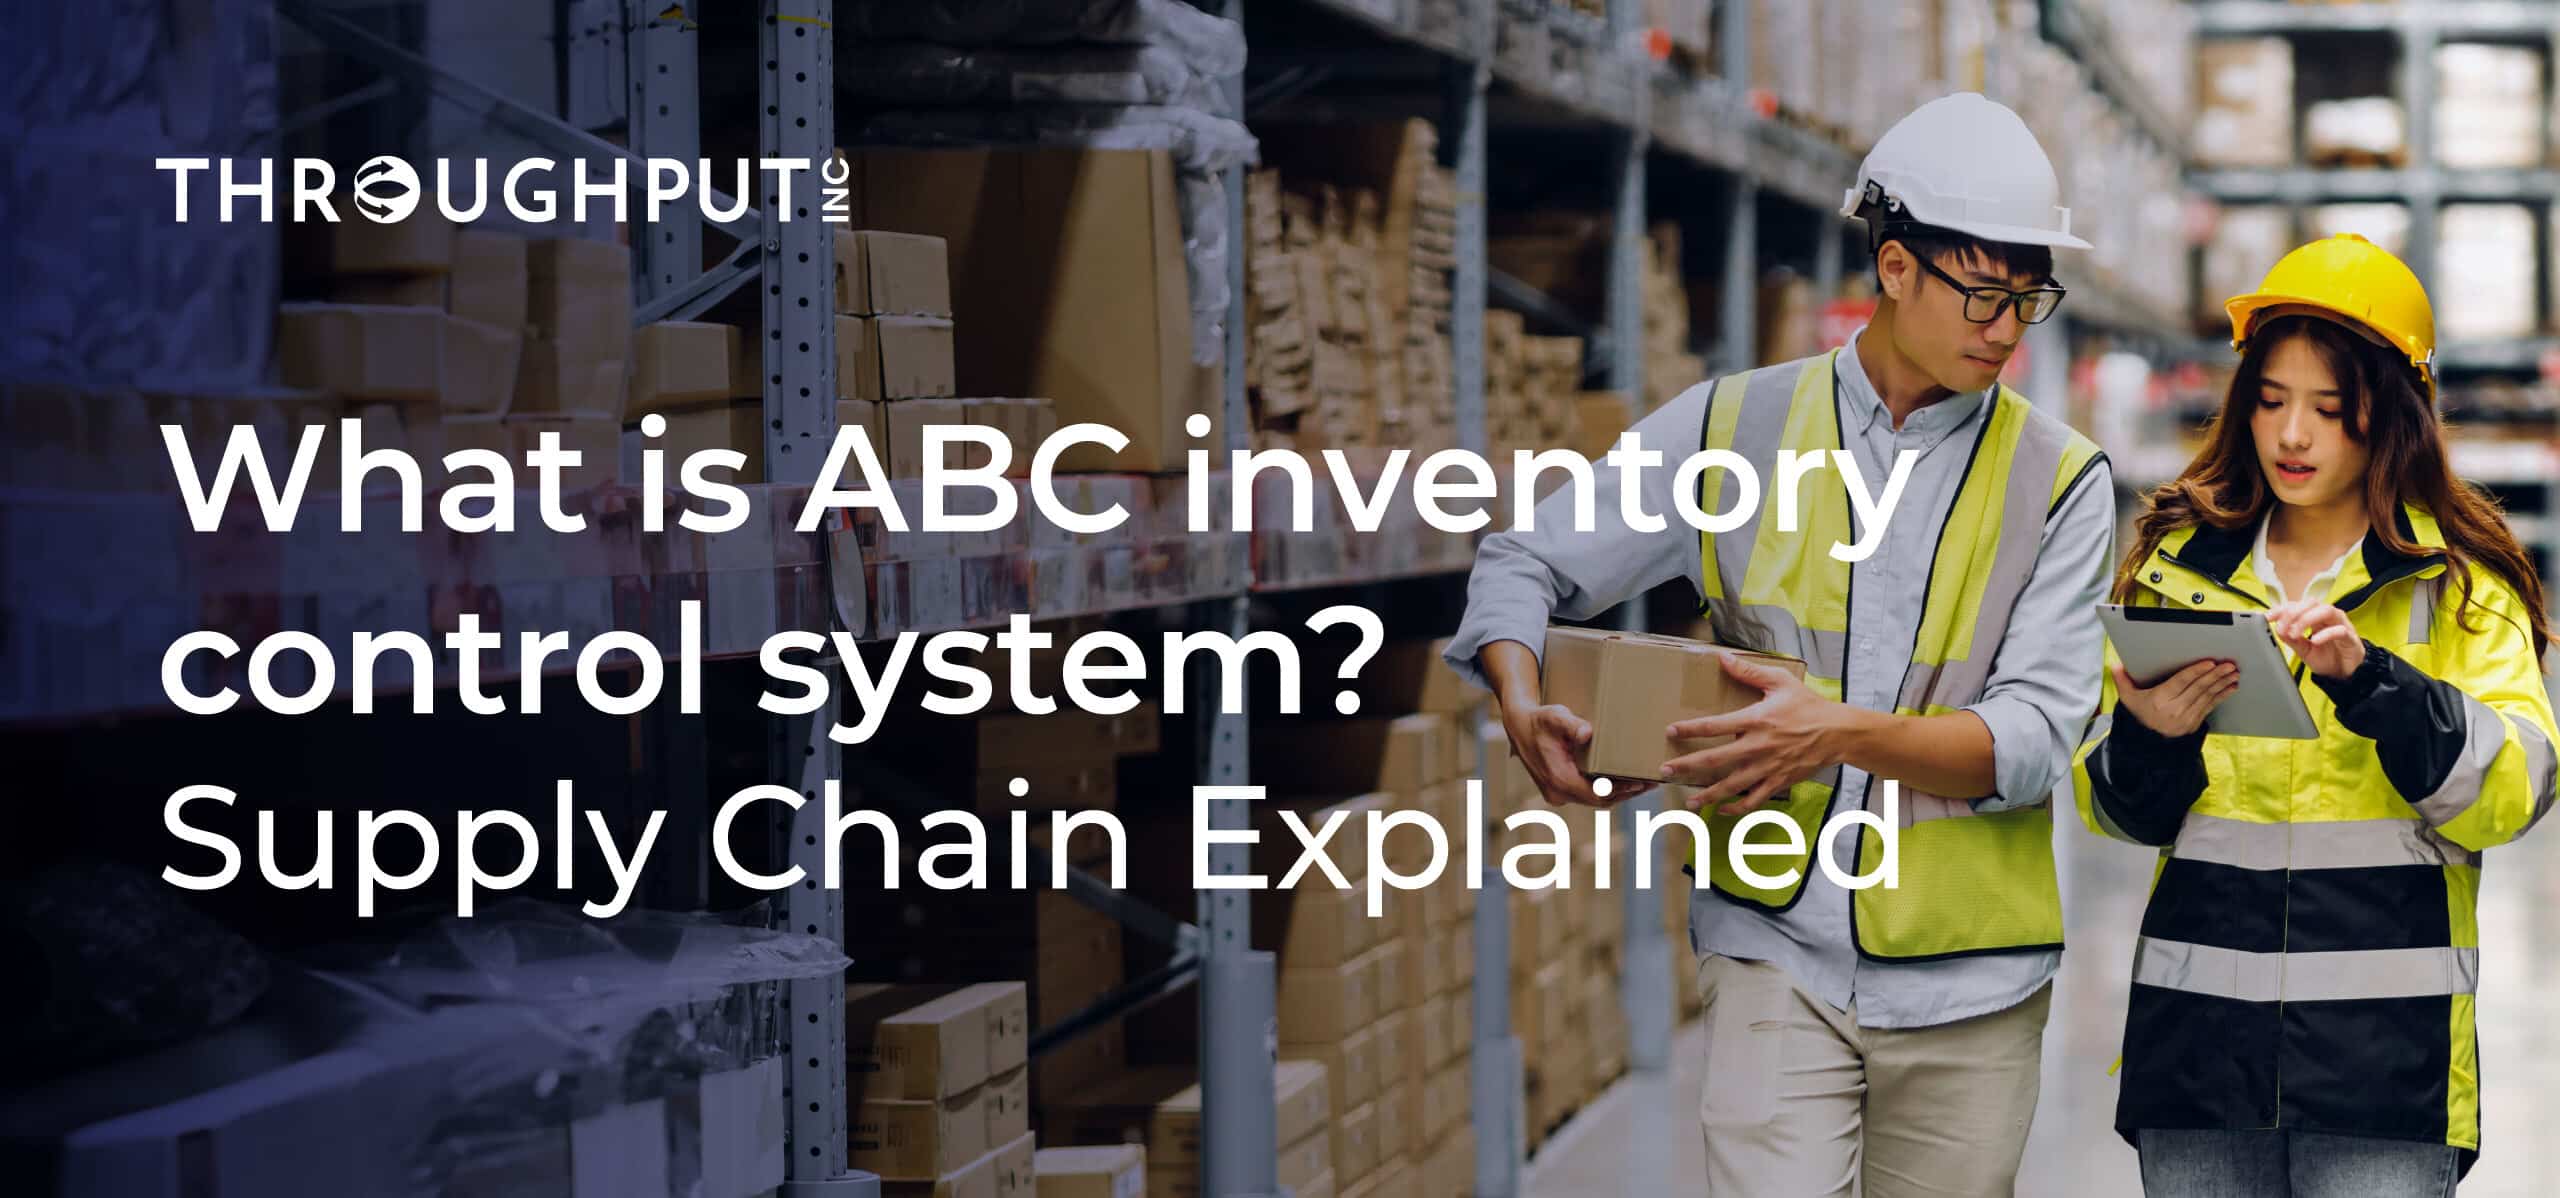 What is ABC inventory control system? Supply Chain Explained